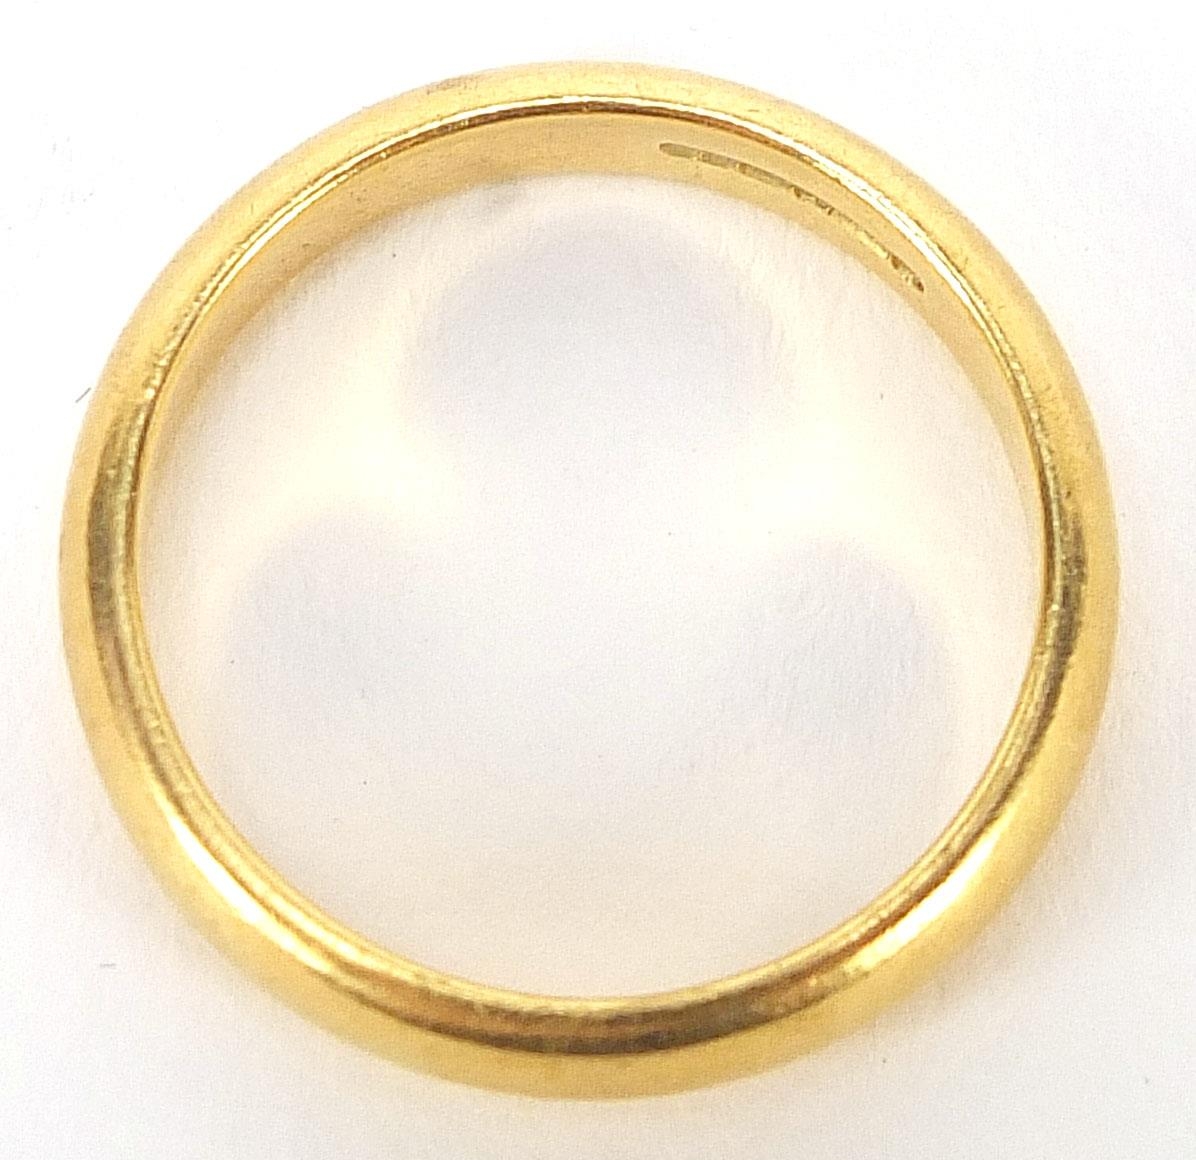 18ct gold wedding band, Birmingham 2001, size Q, 6.0g - this lot is sold without buyer's premium - Image 3 of 4